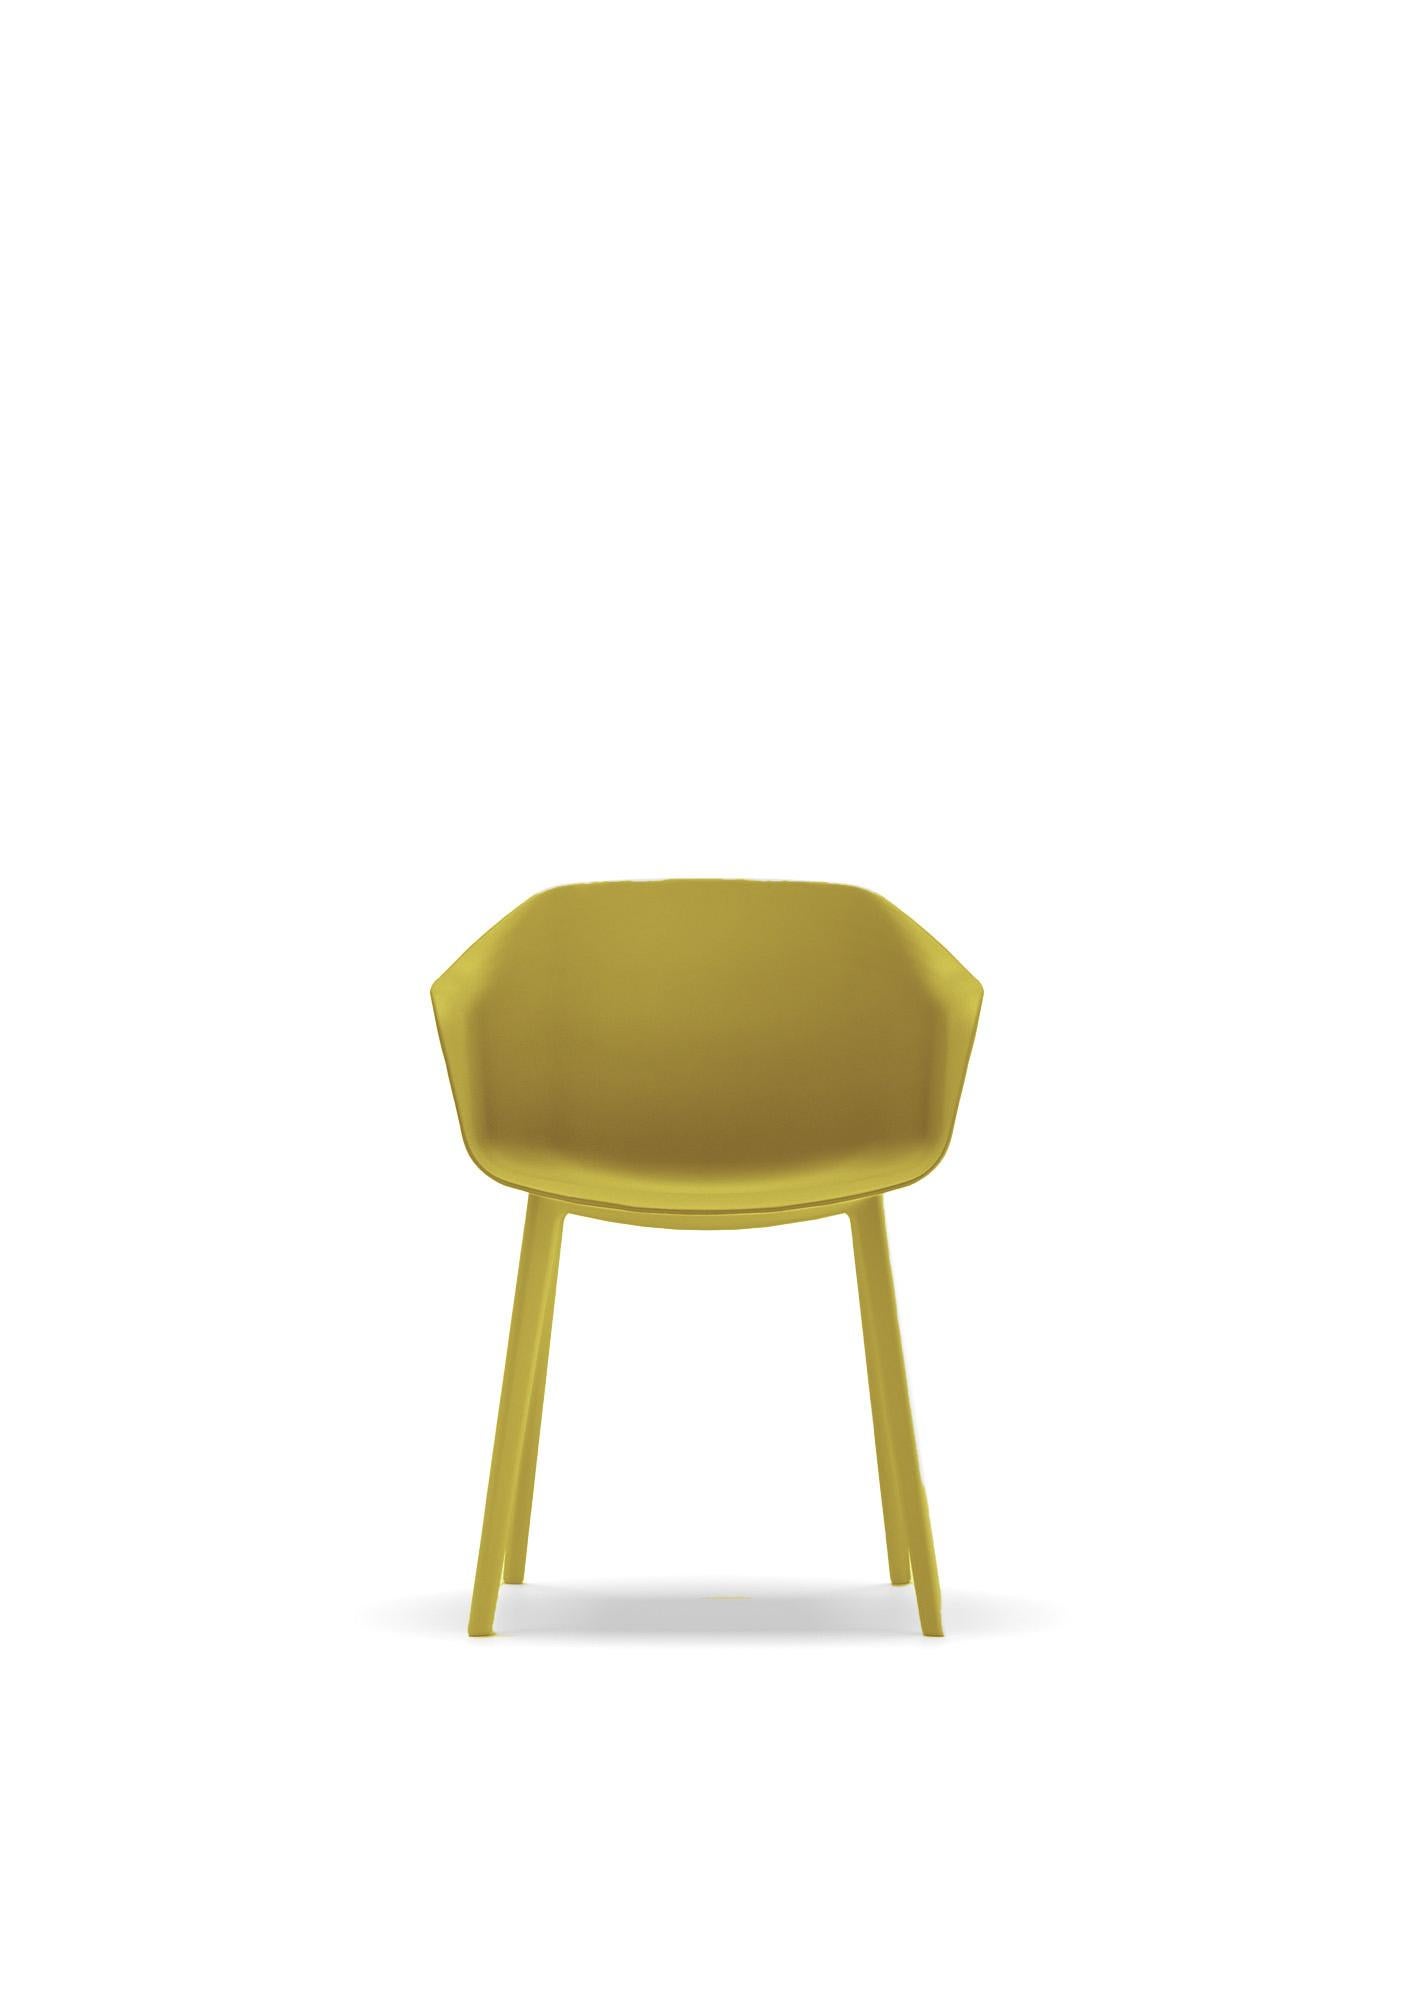 Plastic Armchair Poly made of reinforced plastic sage green for indoor modern design  For Sale